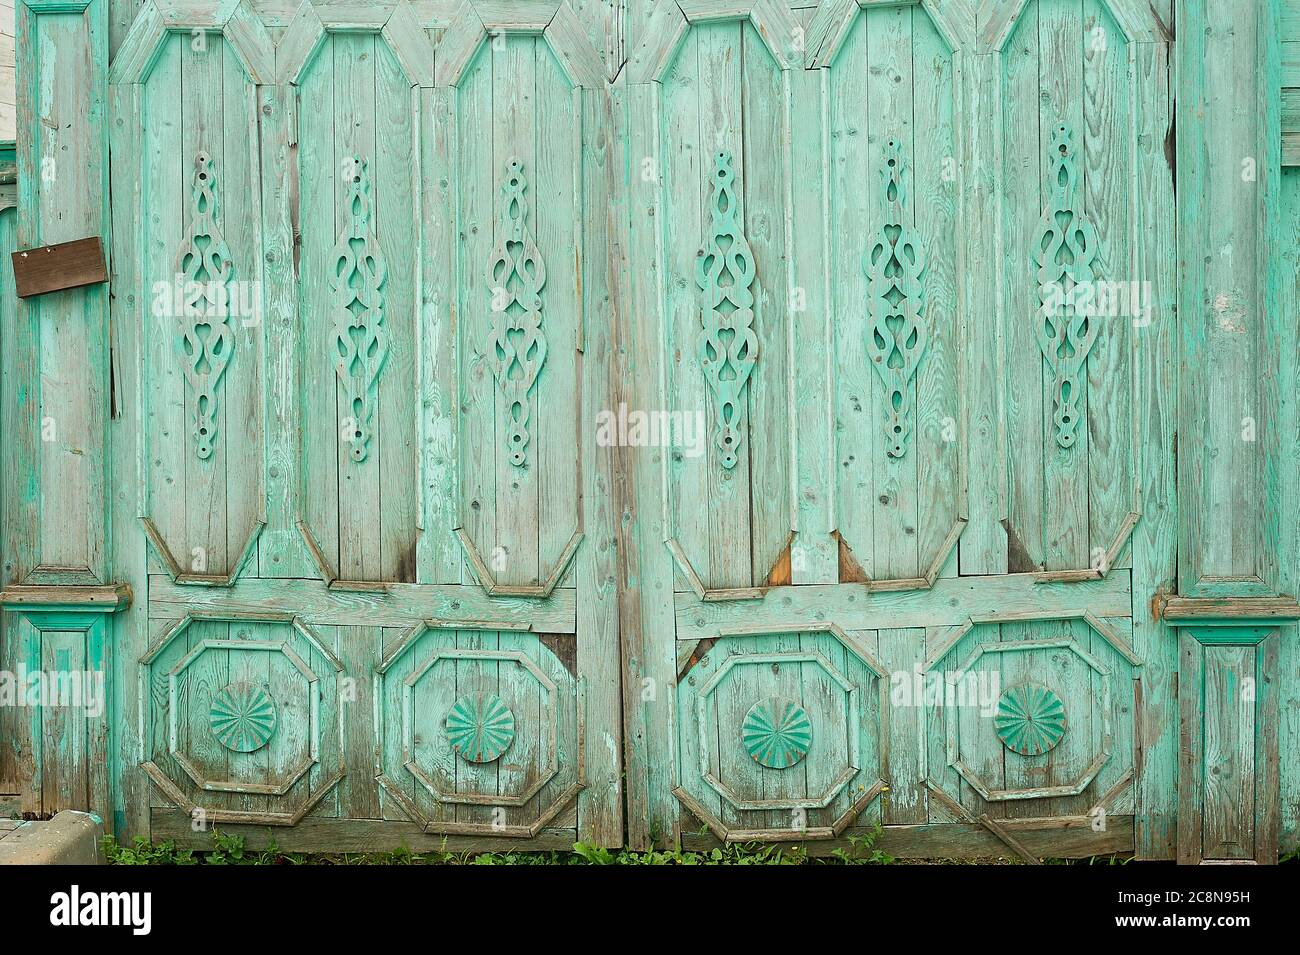 Wooden wide gates in old Russian houses. Figurative ornaments made of wood.Bright colors. Ancient wooden Russian houses. Stock Photo